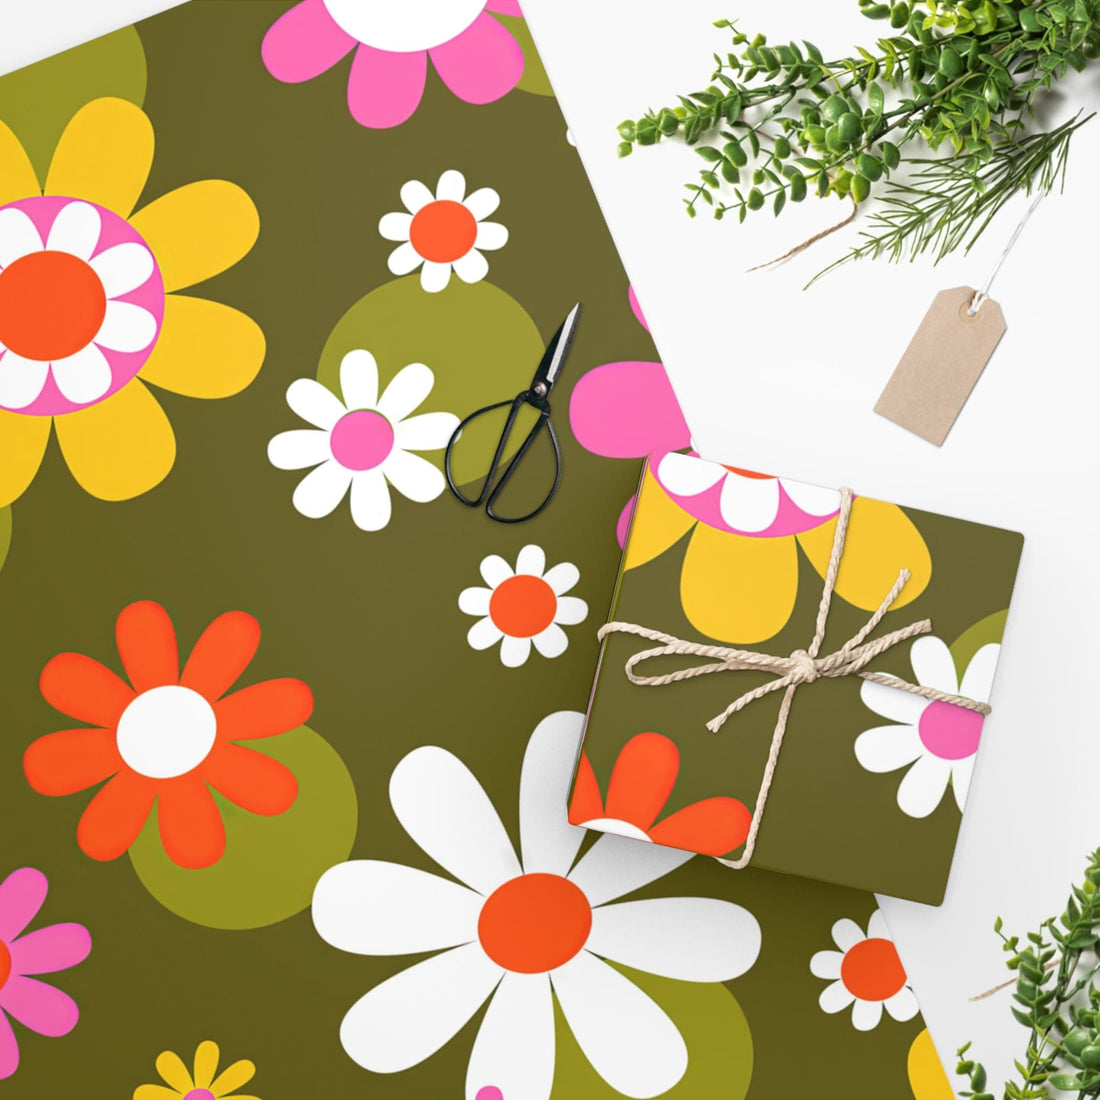 Kate McEnroe New York Groovy Hippie Daisy Flower Power Wrapping Paper, Mid Century Modern Retro Gift WrapWrapping Paper26010754124761524967